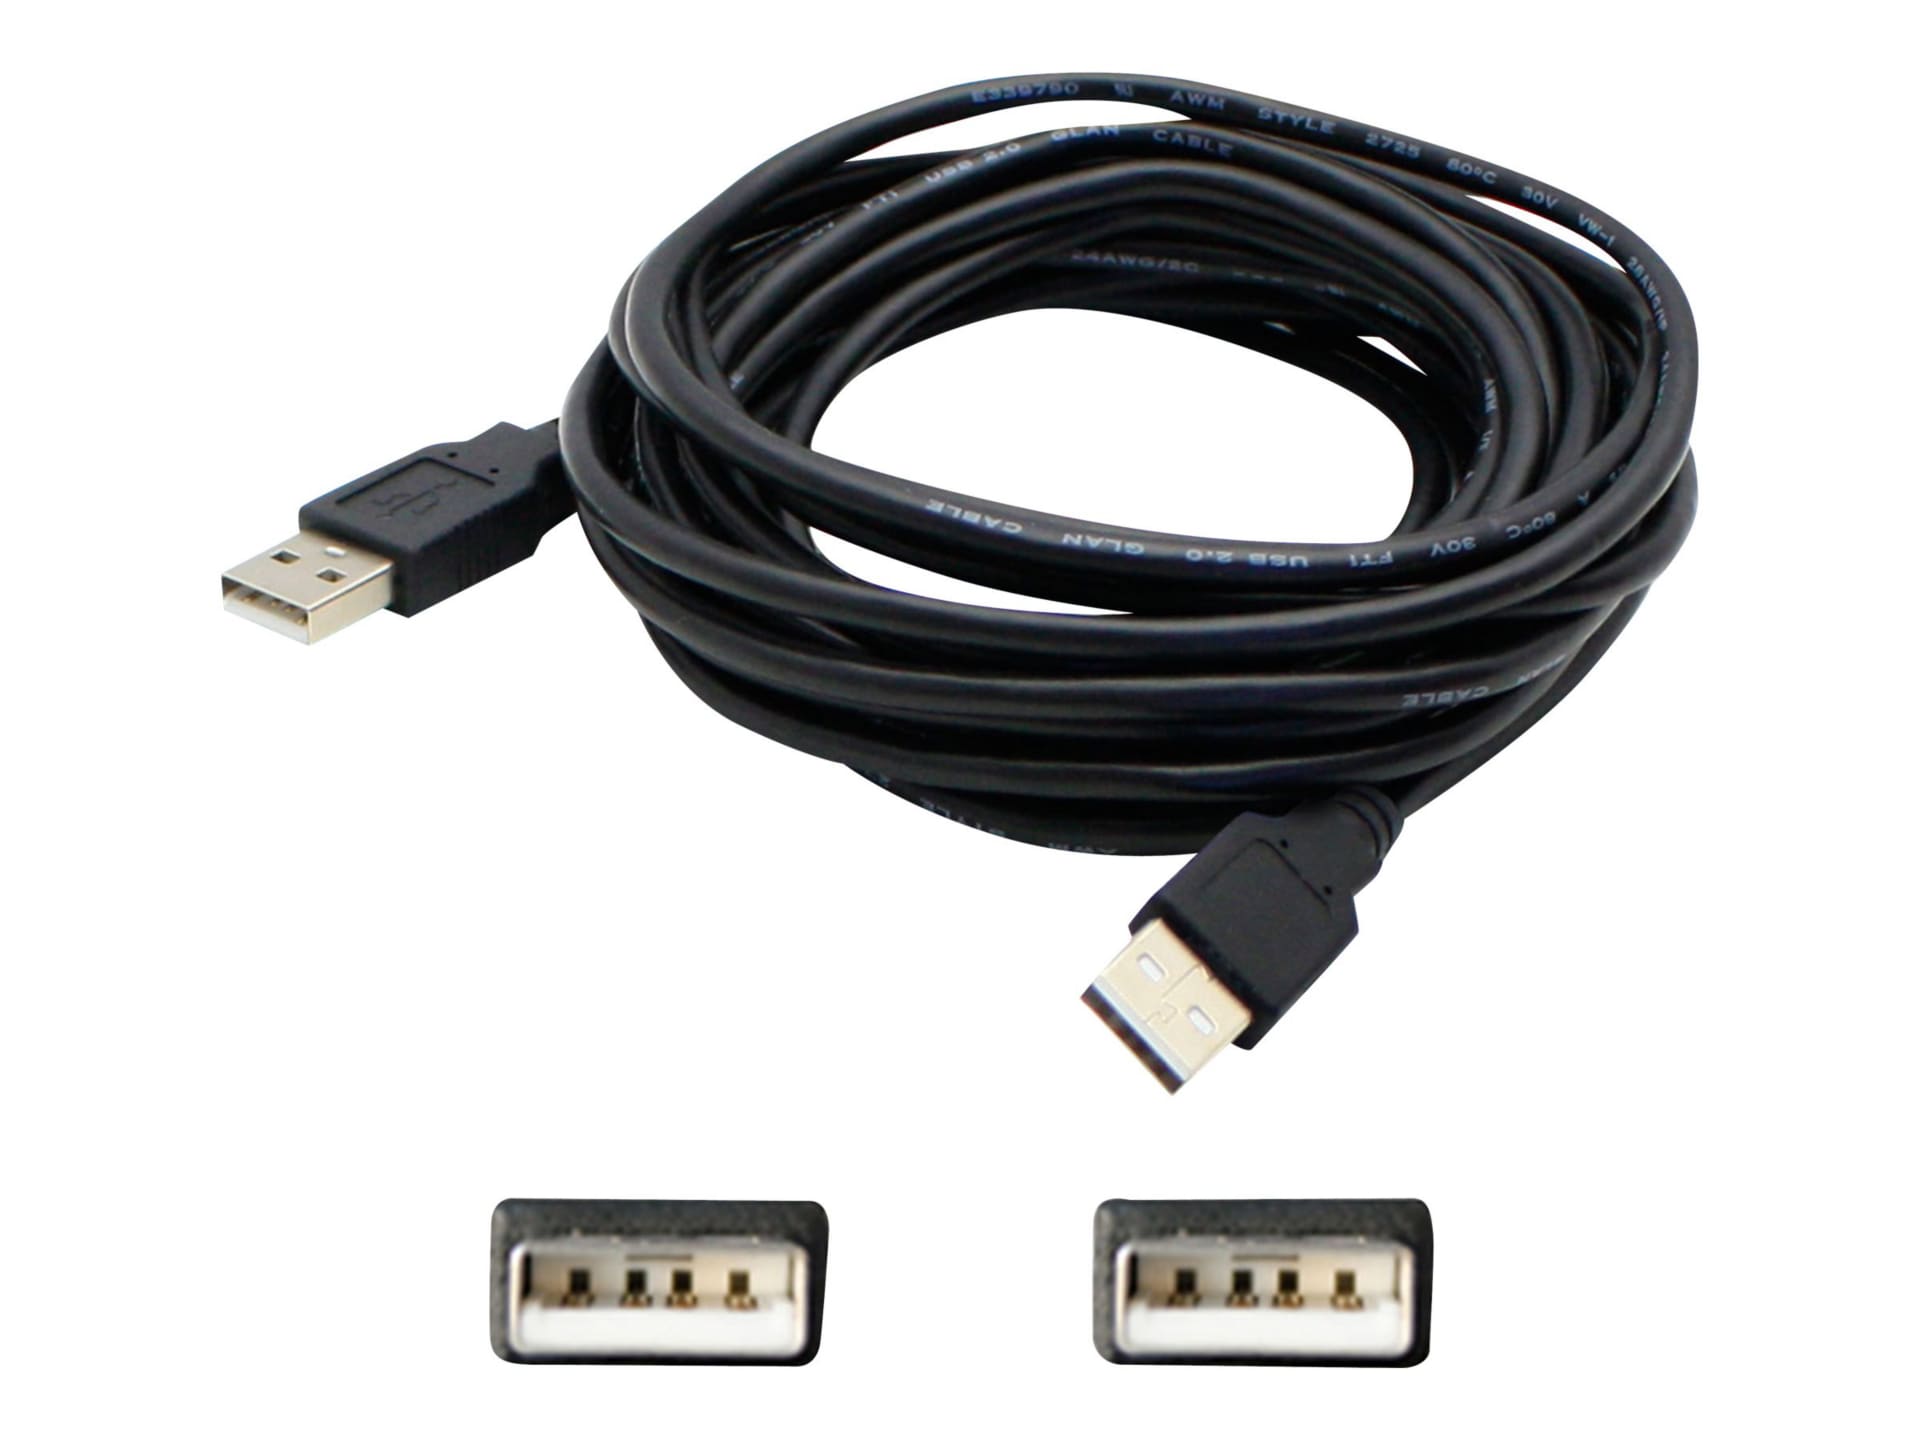 Proline - USB cable - USB Type B to USB - 3 ft